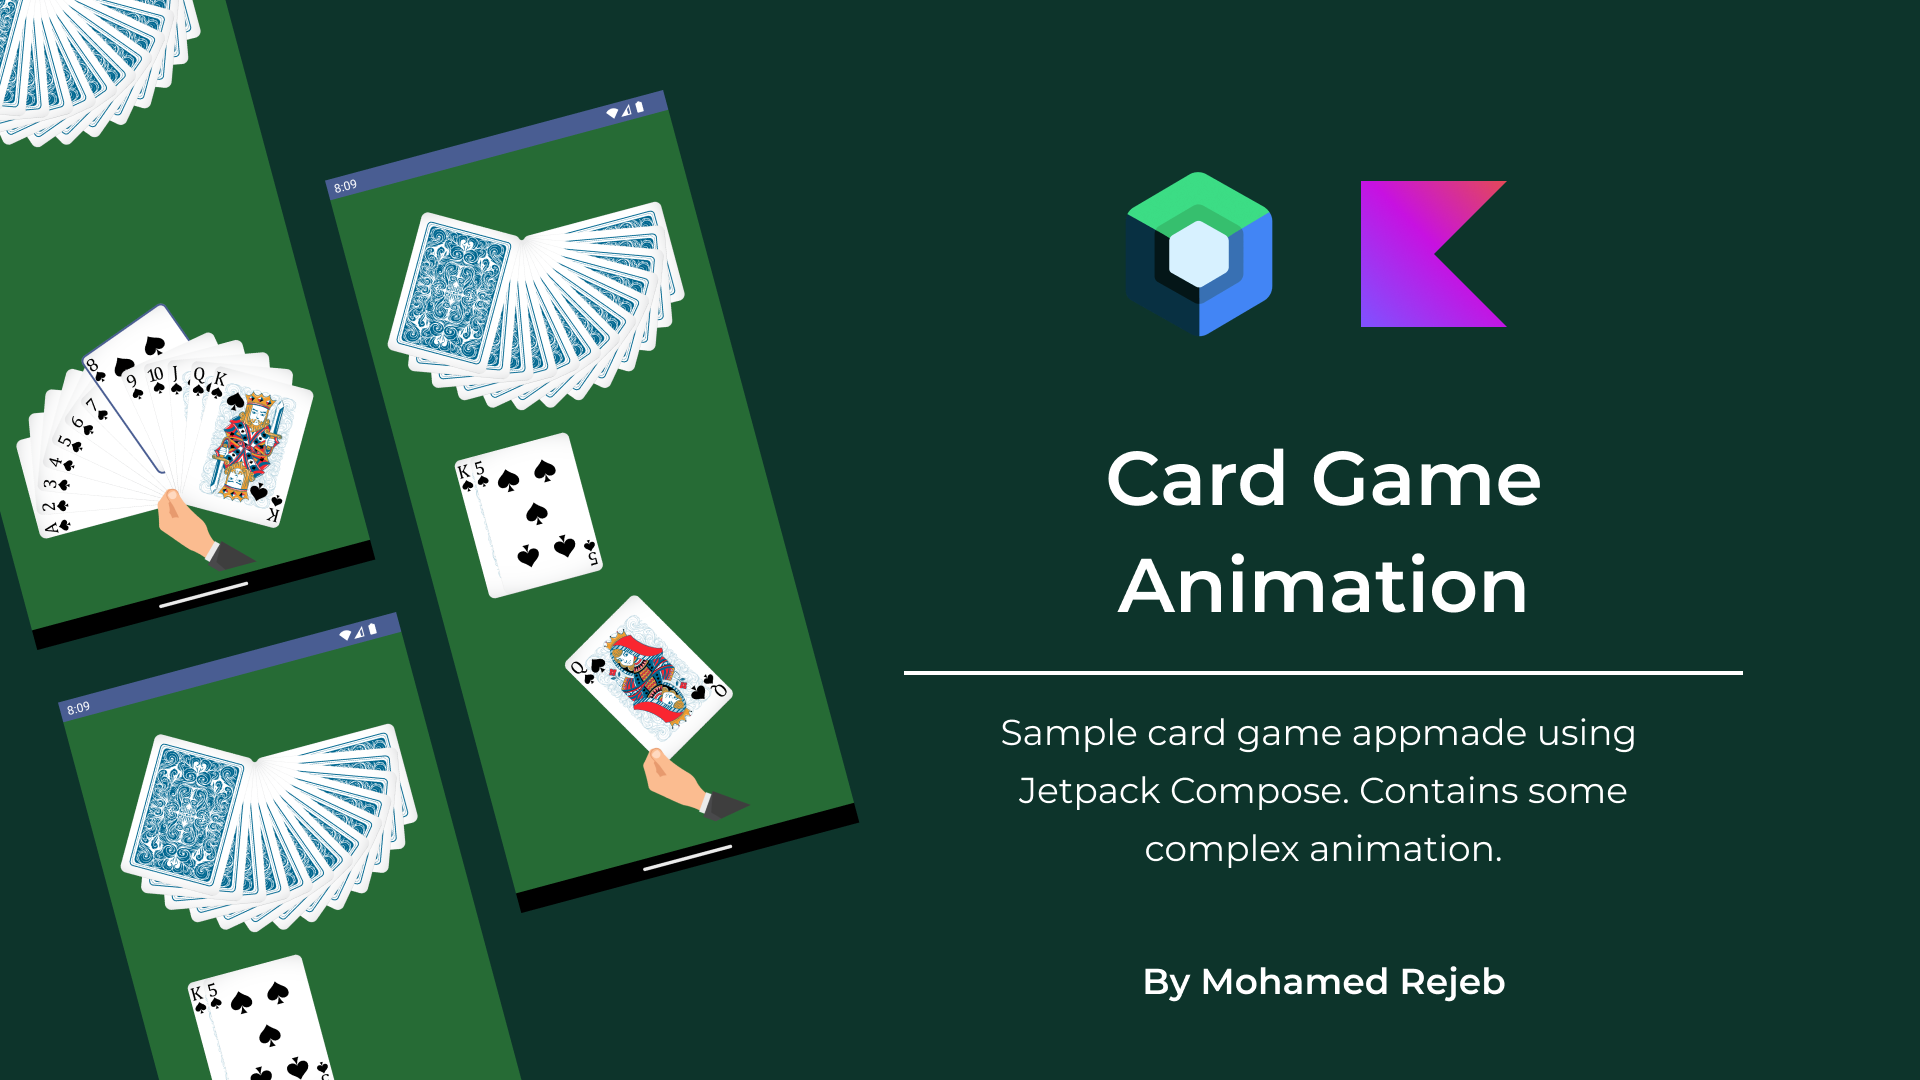 Card Game Animation